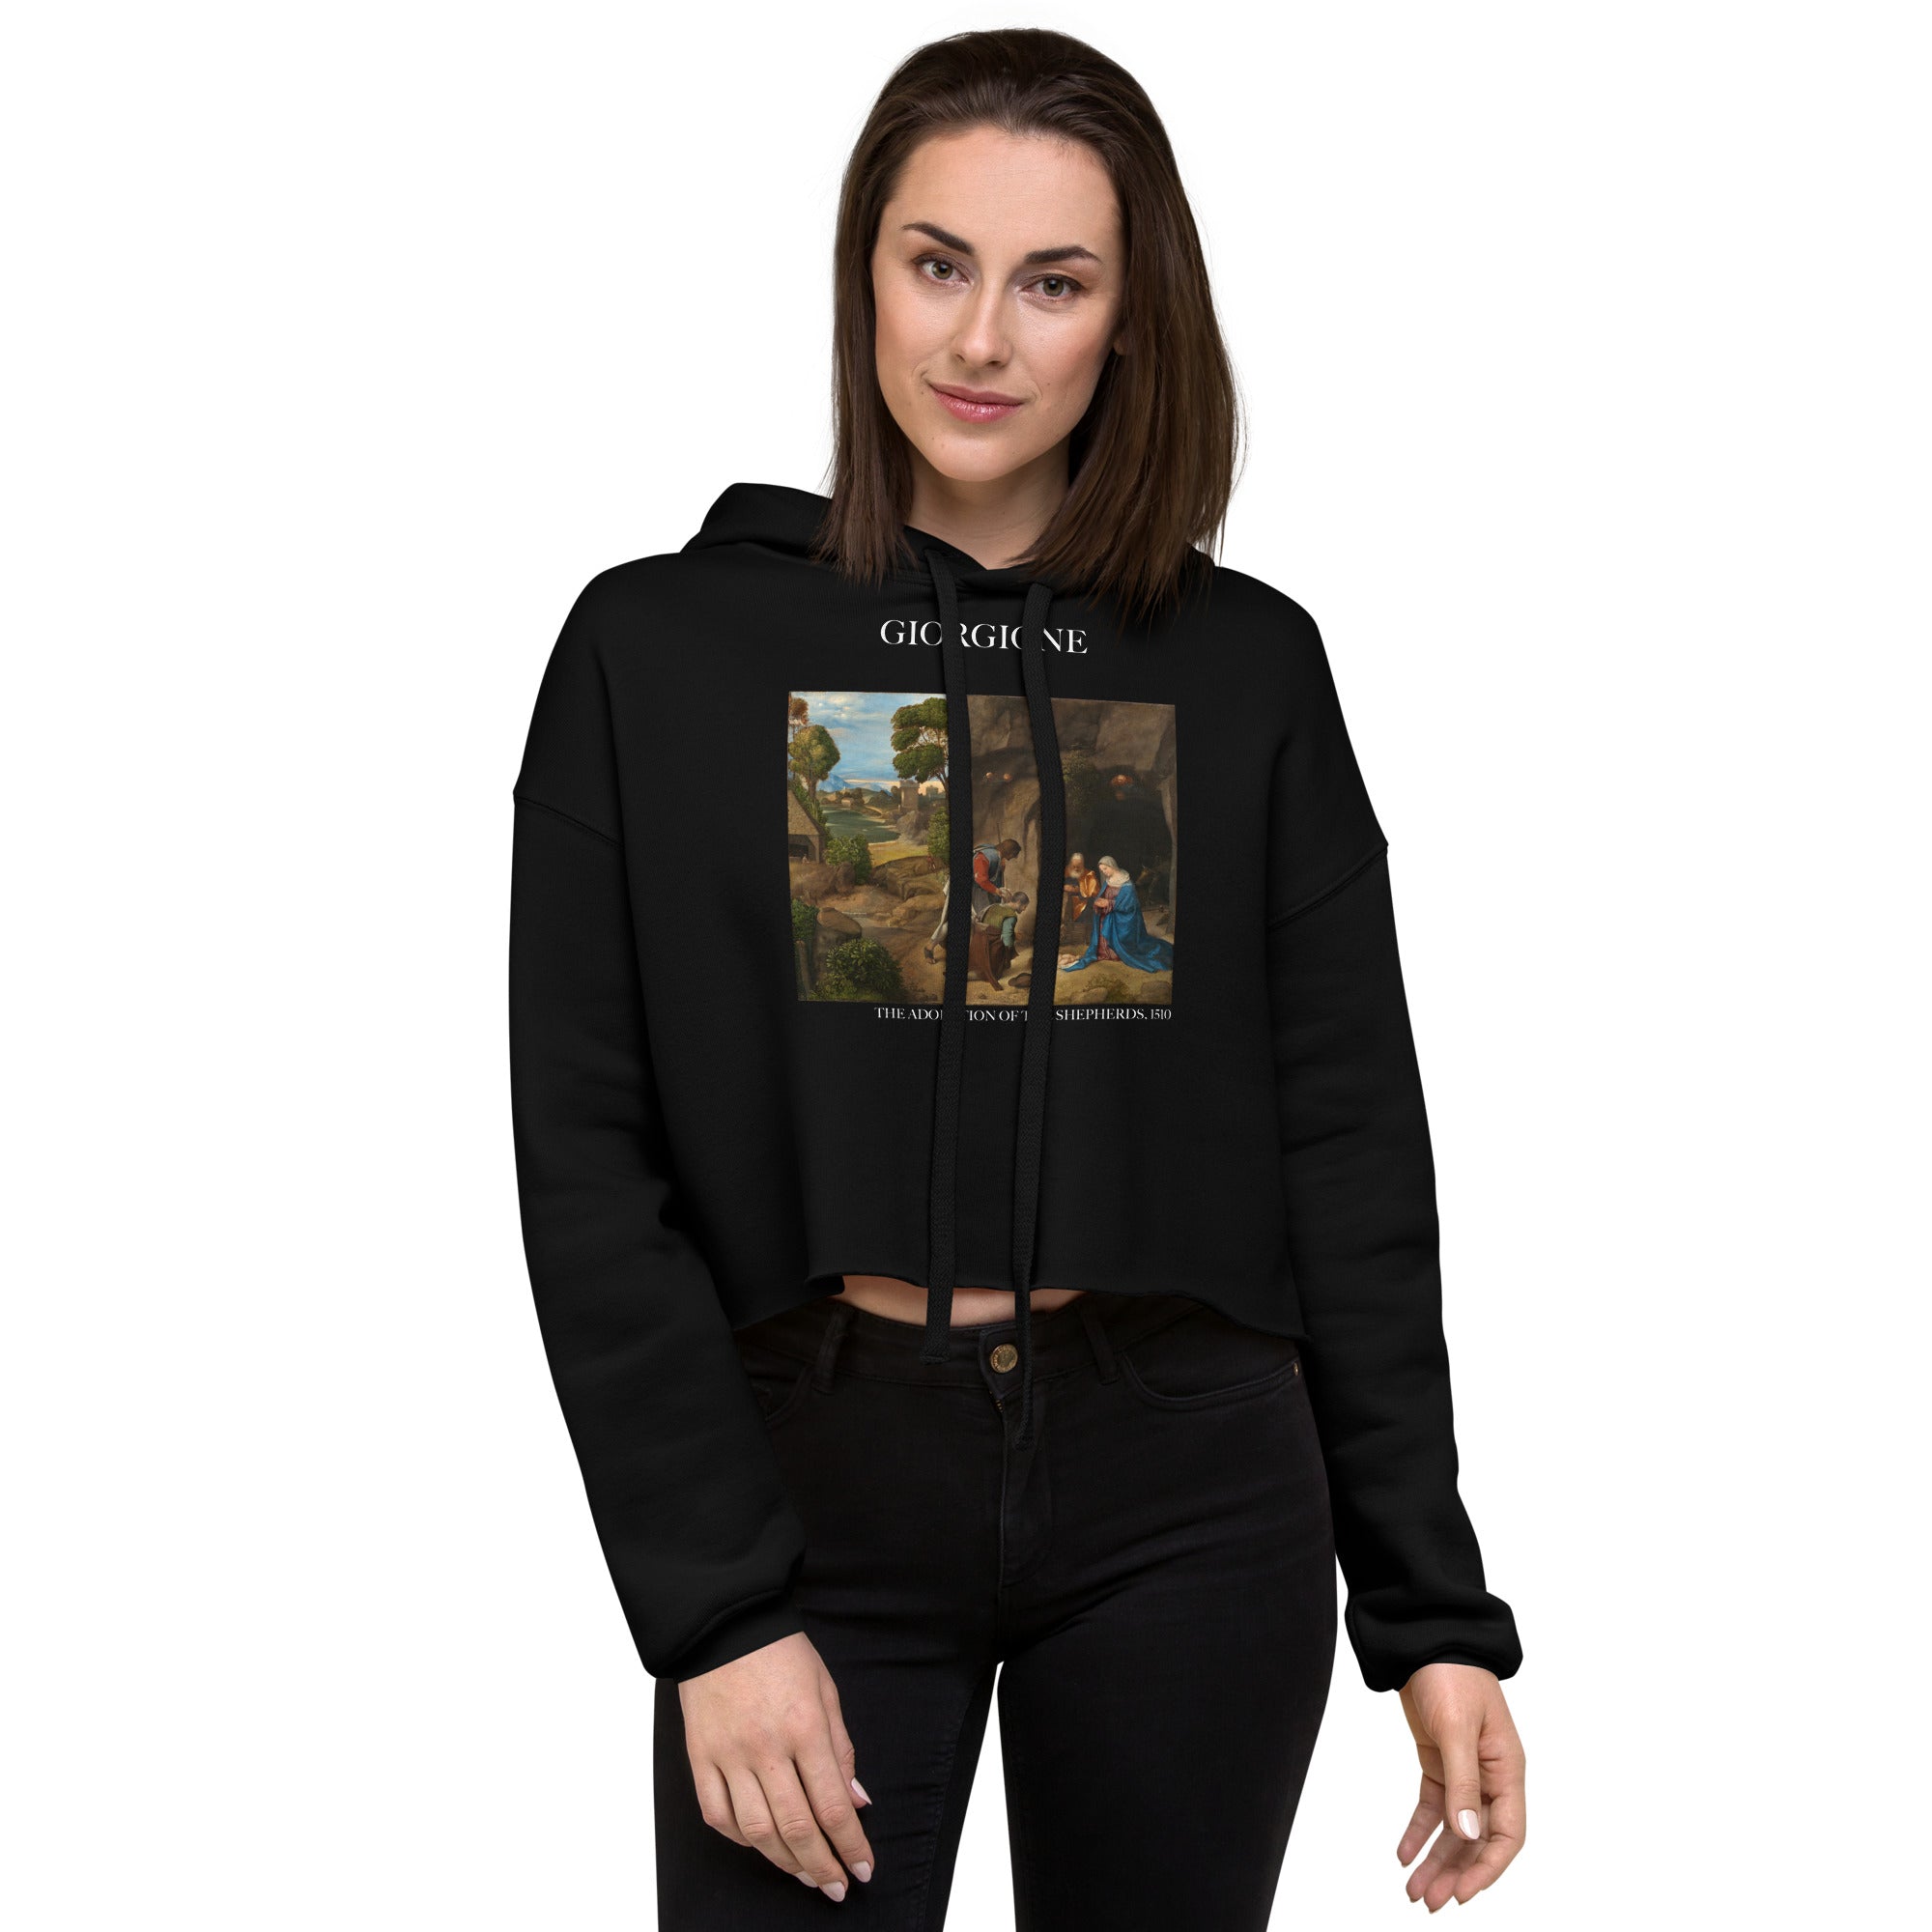 Giorgione 'The Adoration of the Shepherds' Famous Painting Cropped Hoodie | Premium Art Cropped Hoodie